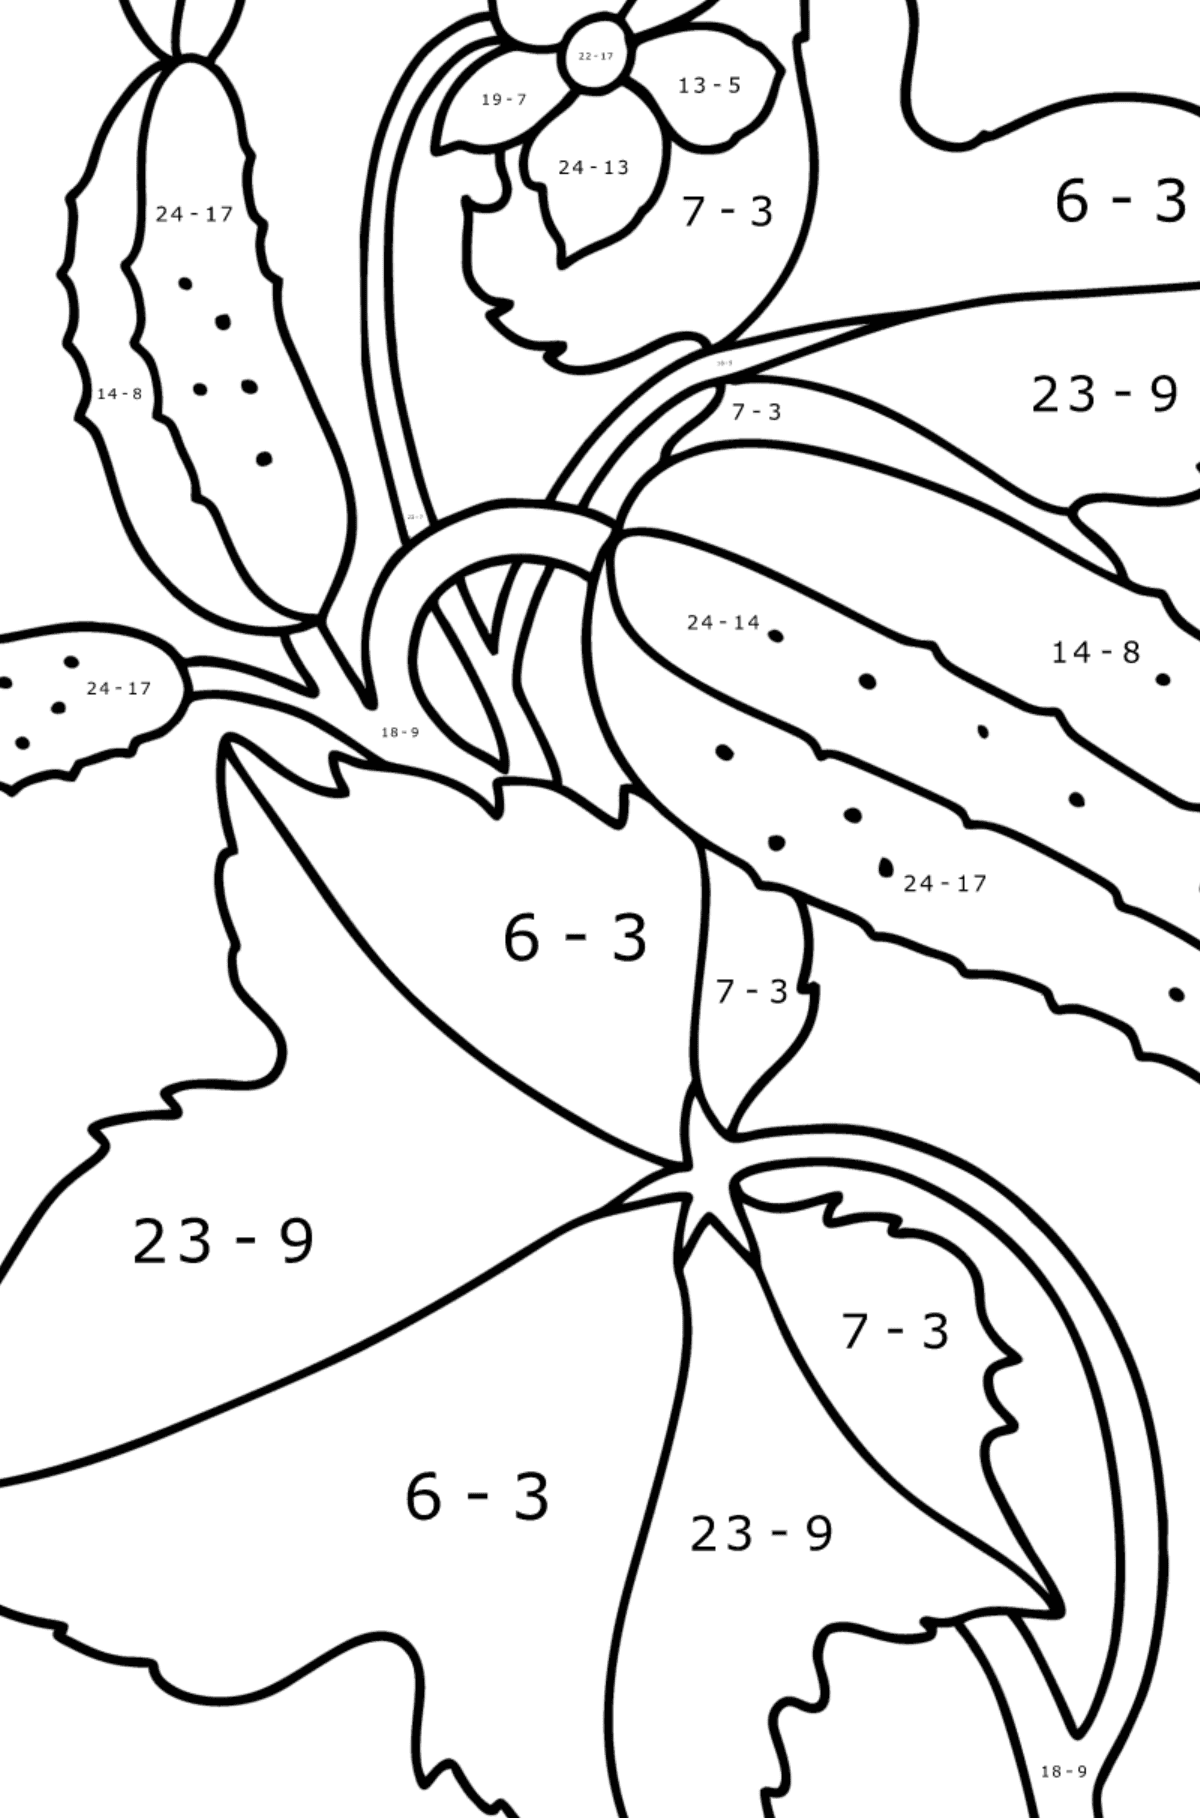 Cucumbers on a branch сoloring page - Math Coloring - Subtraction for Kids